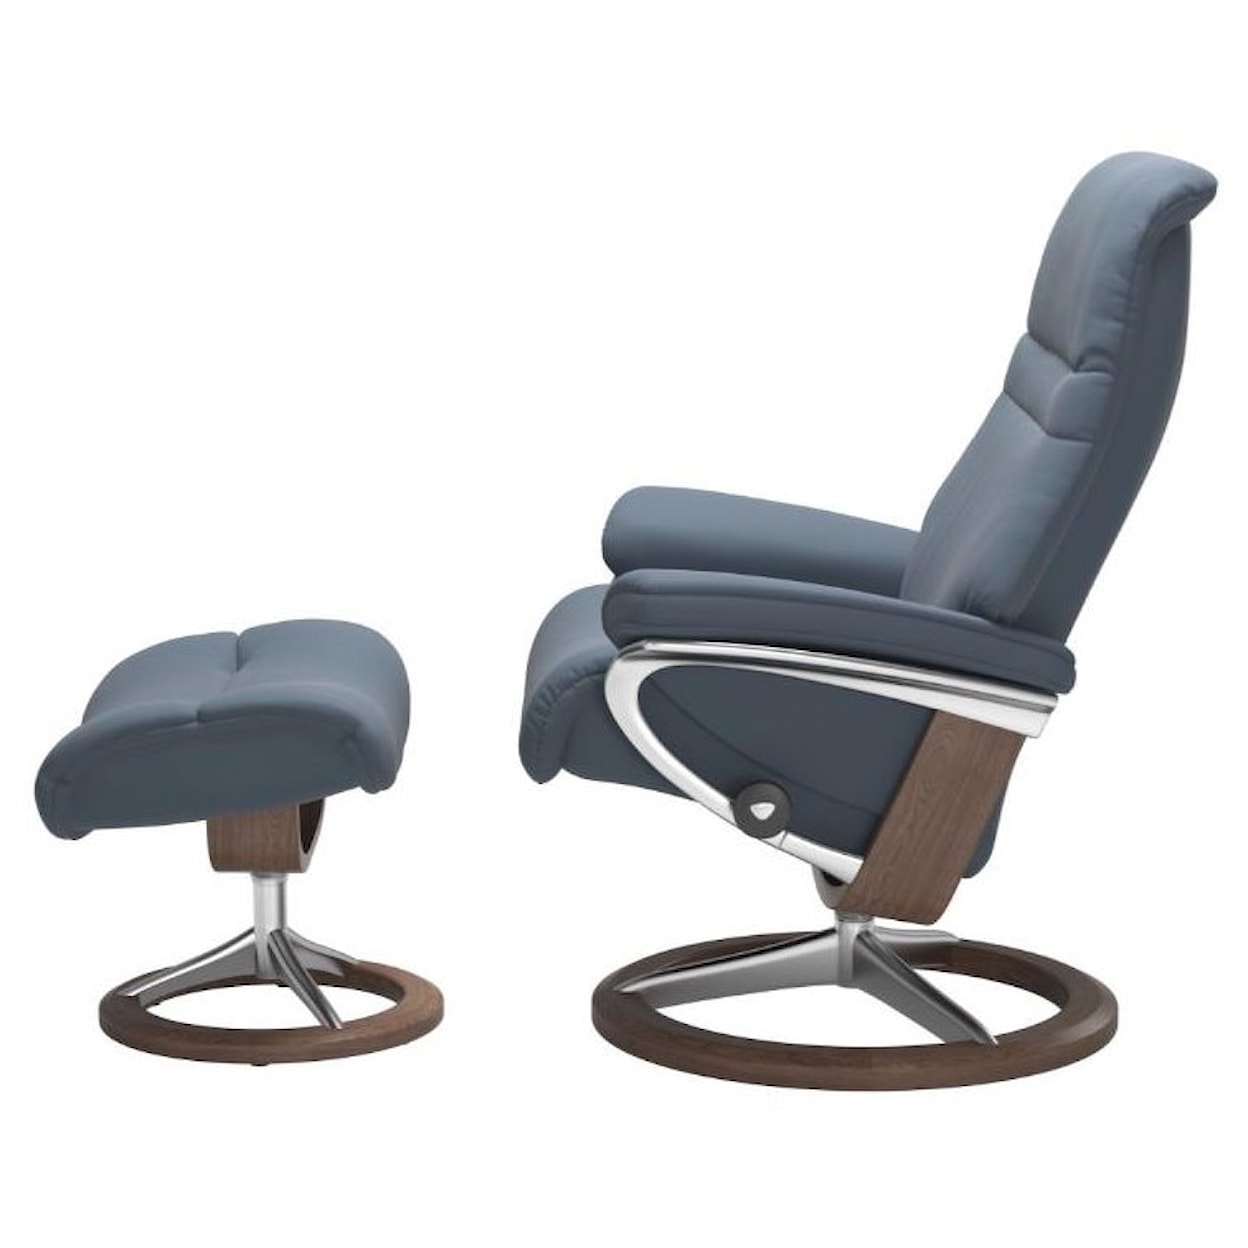 Stressless Sunrise Large Reclining Chair and Ottoman